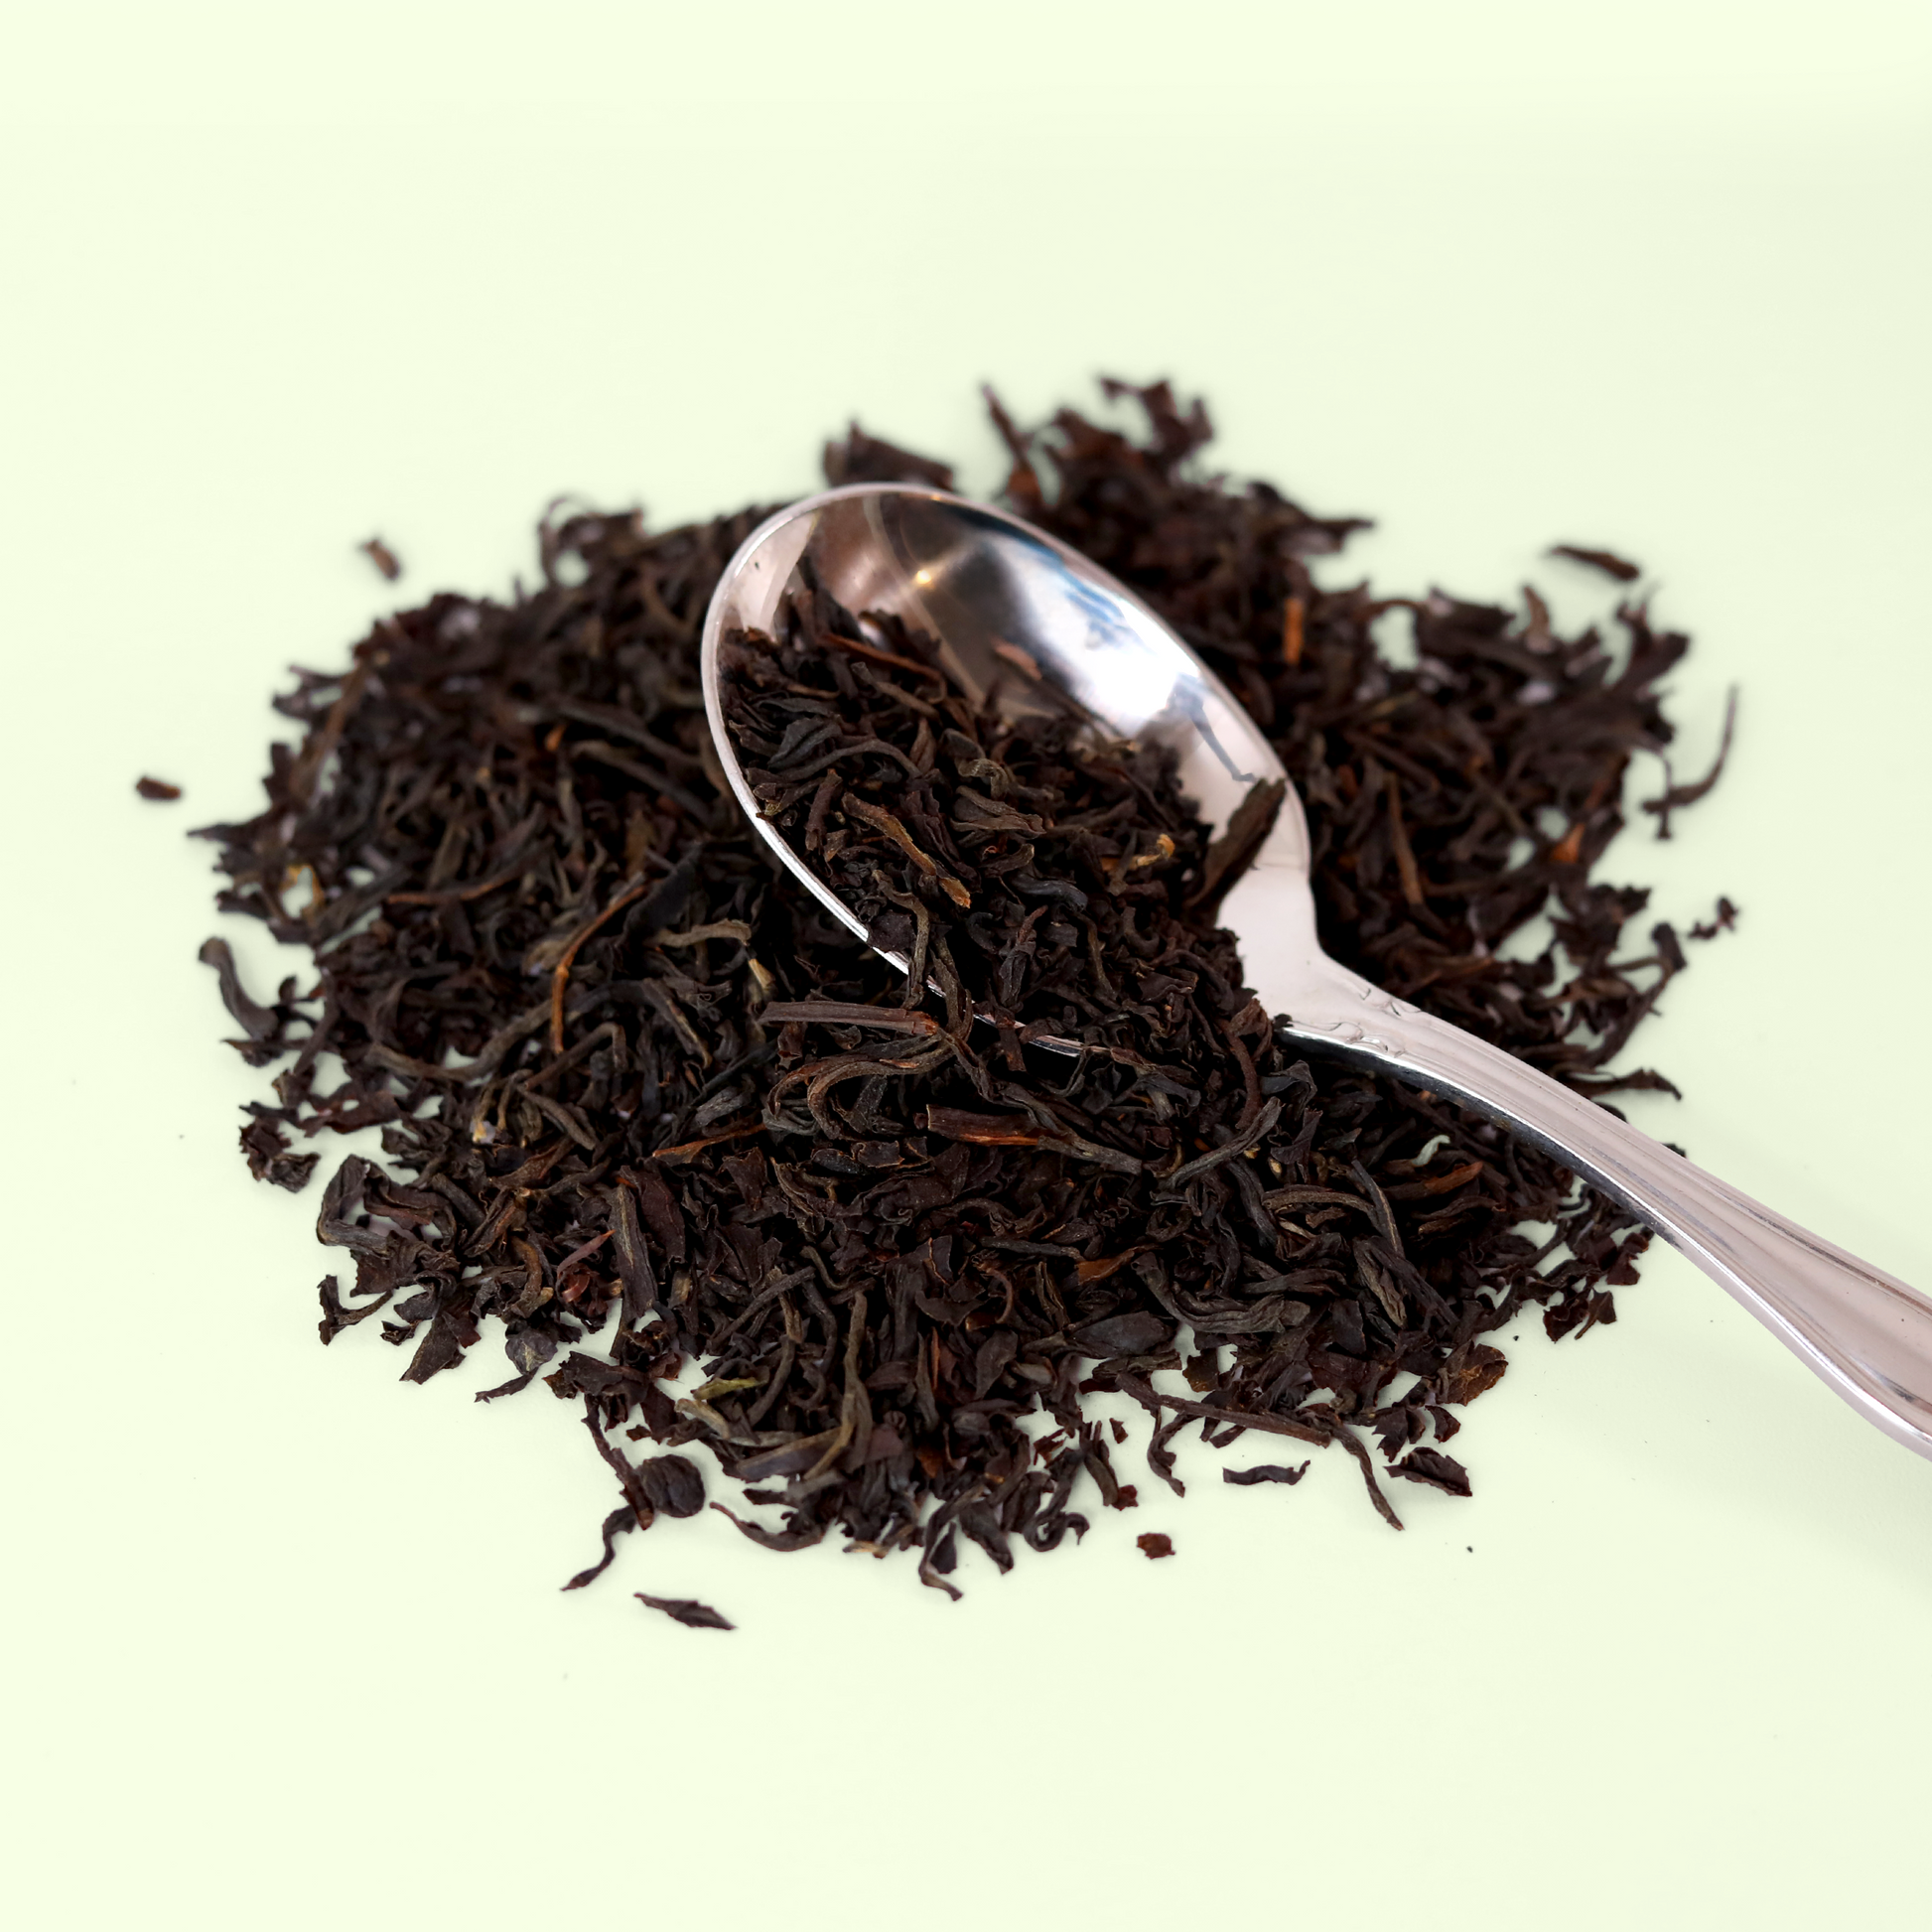  A close-up view of a pile of dried Bright Star Breakfast Blend tea leaves. A metal spoon is visible, scooping up some of the tea blend. A Good Store product.